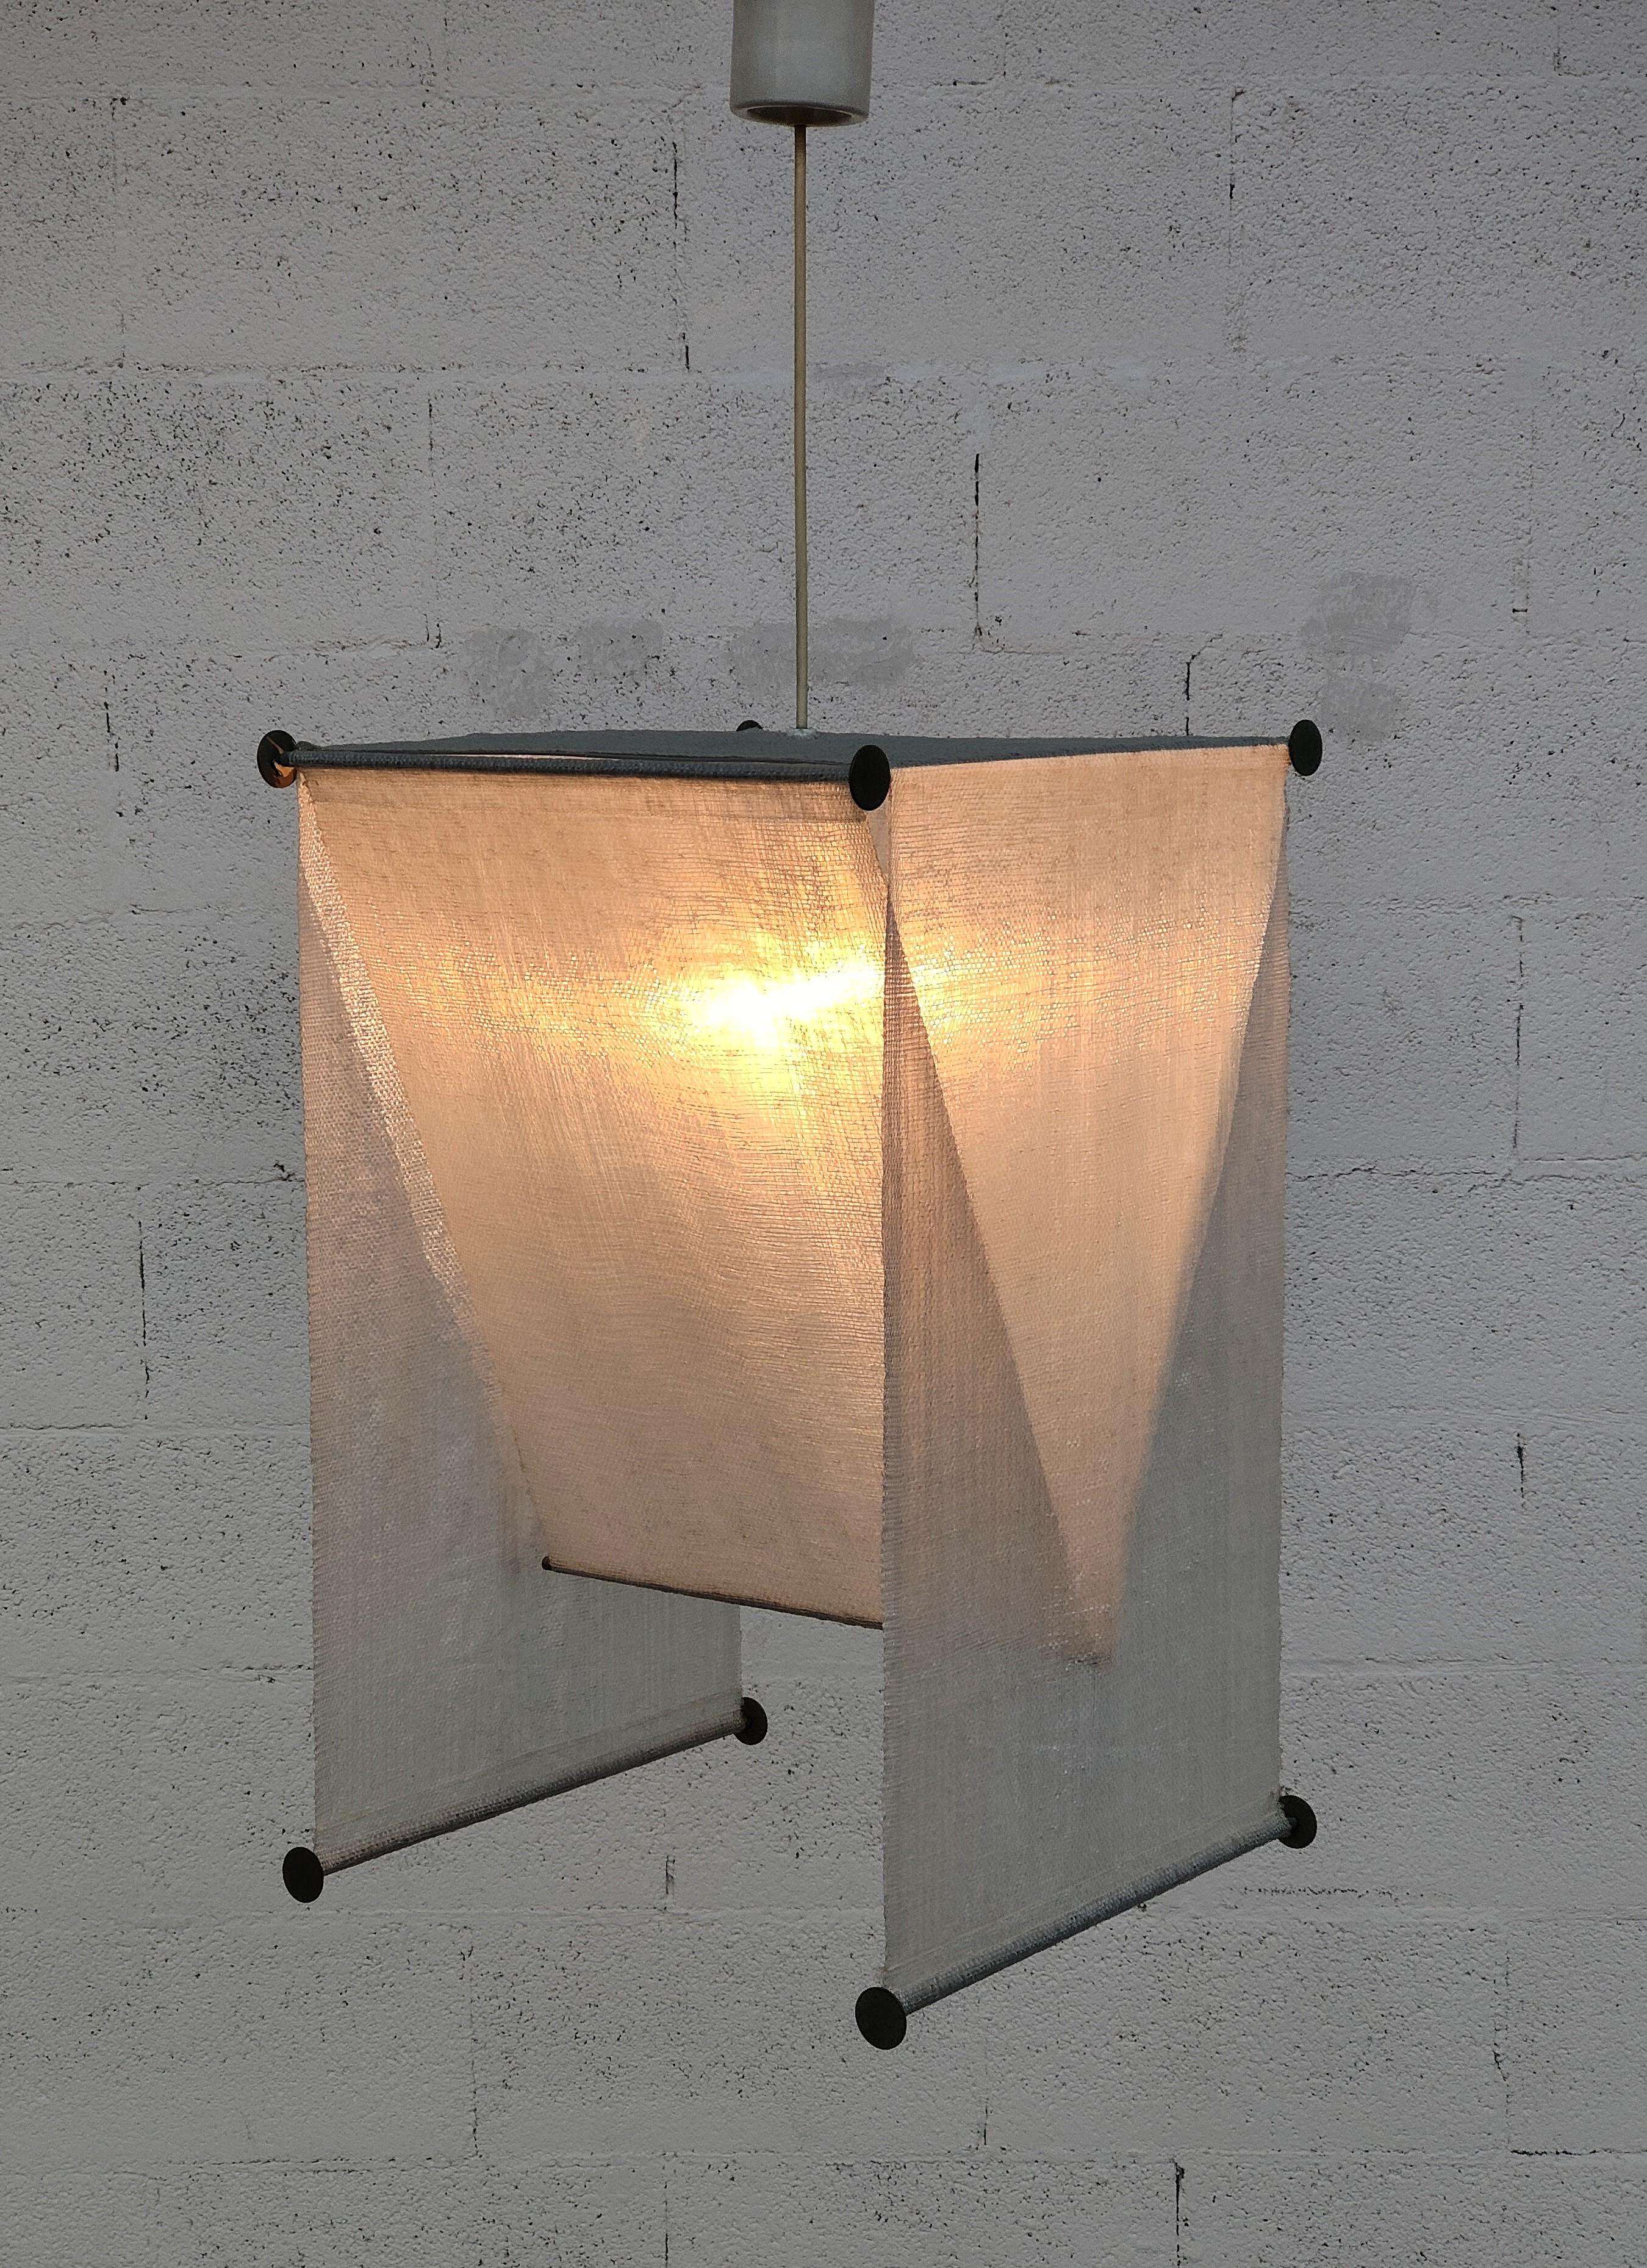 Suspension lamp designed by Achille and Piergiacomo Castiglioni.
Initially produced by Kartell from 1959, later manufactured by Flos after 1973.
Teli was born from the idea of exploiting the soft light filtering quality of raflon, a new